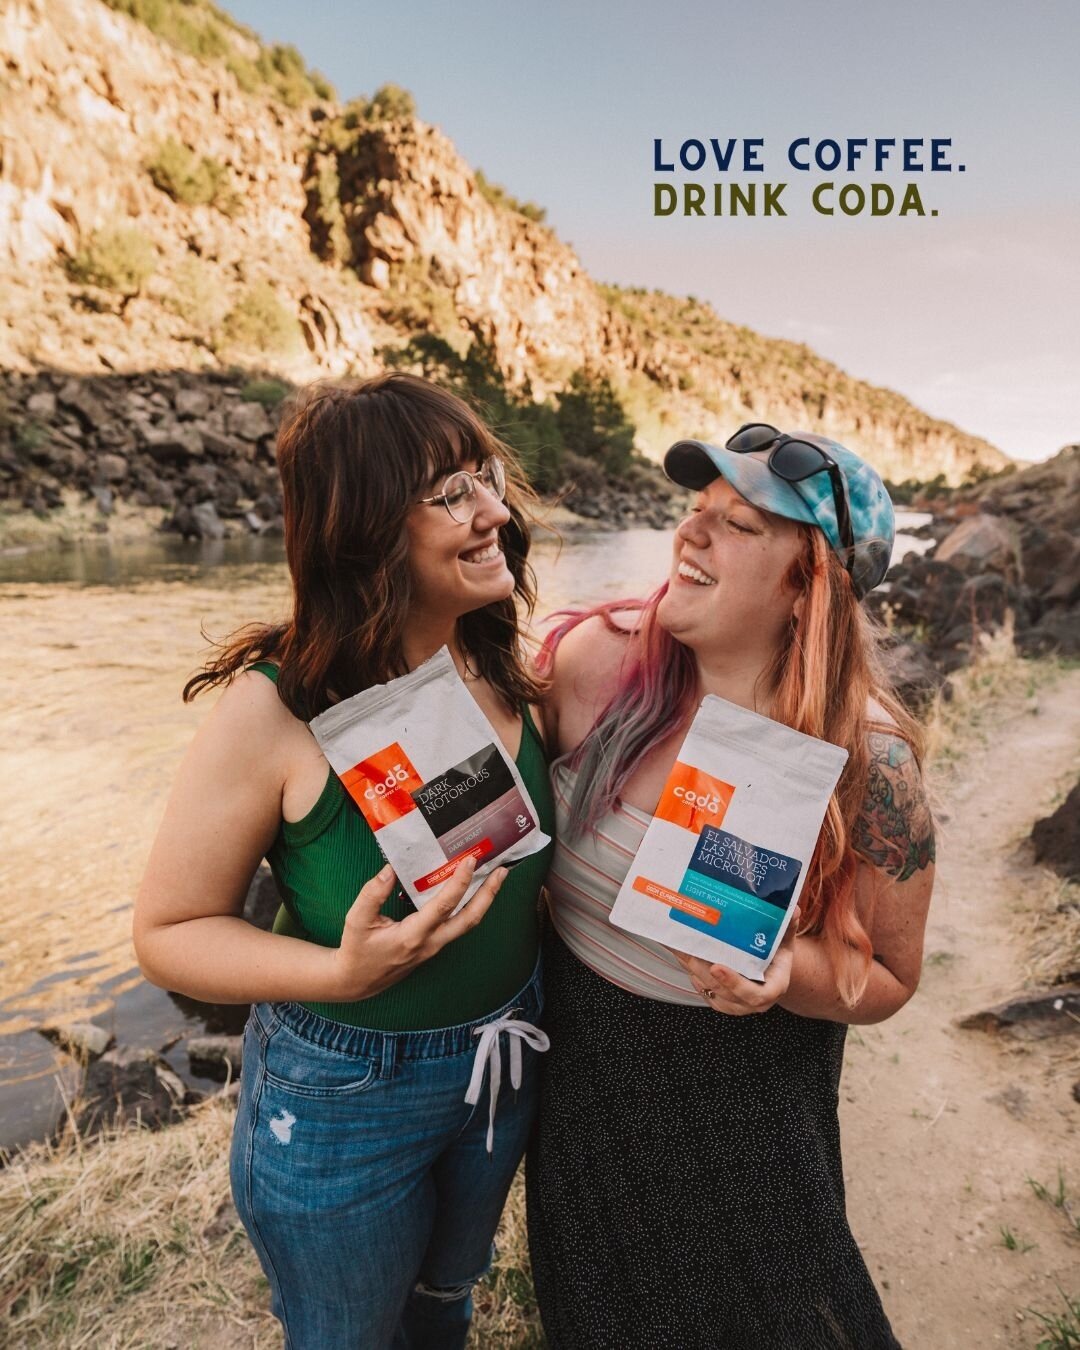 As a trusted roaster and distributor since 2005, we take pride in sourcing, roasting, and delivering exceptional coffee experiences. From Denver, CO to Glendale, AZ, we bring the perfect cup of joe to your doorstep. Don't forget to tag your coffee ad